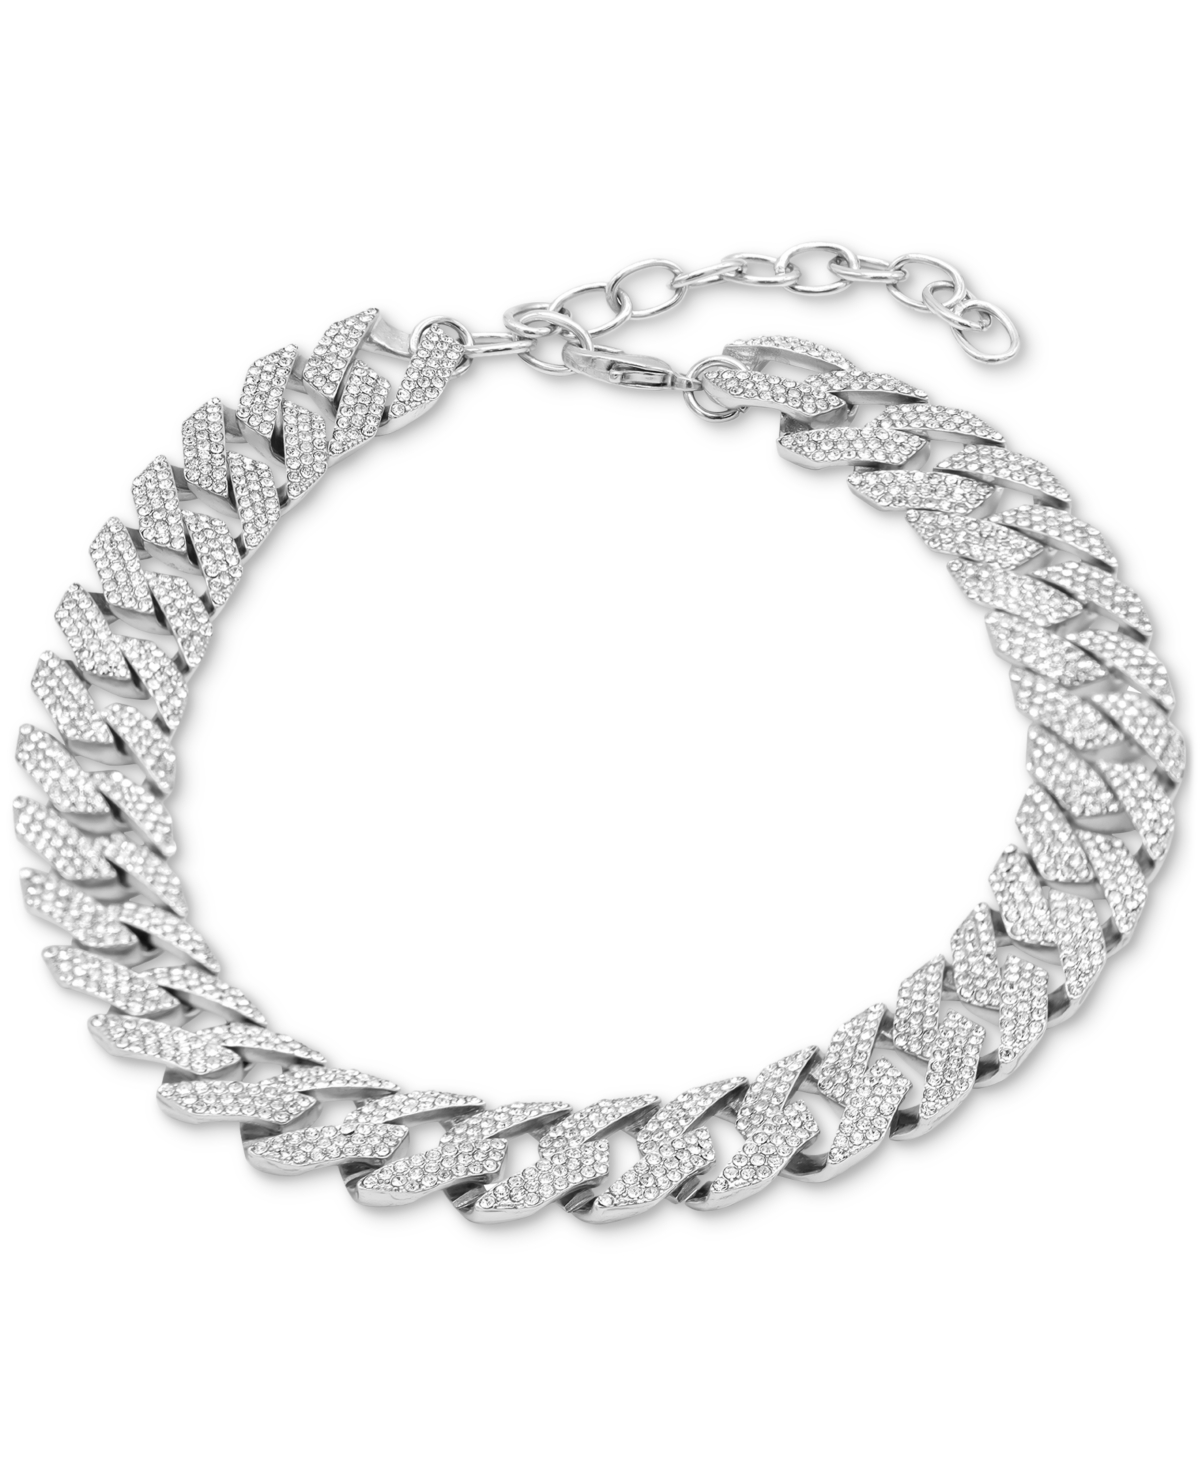 Silver-Tone Crystal Cuban Chain Choker Necklace, 12-1/2" + 3" extender - Silver